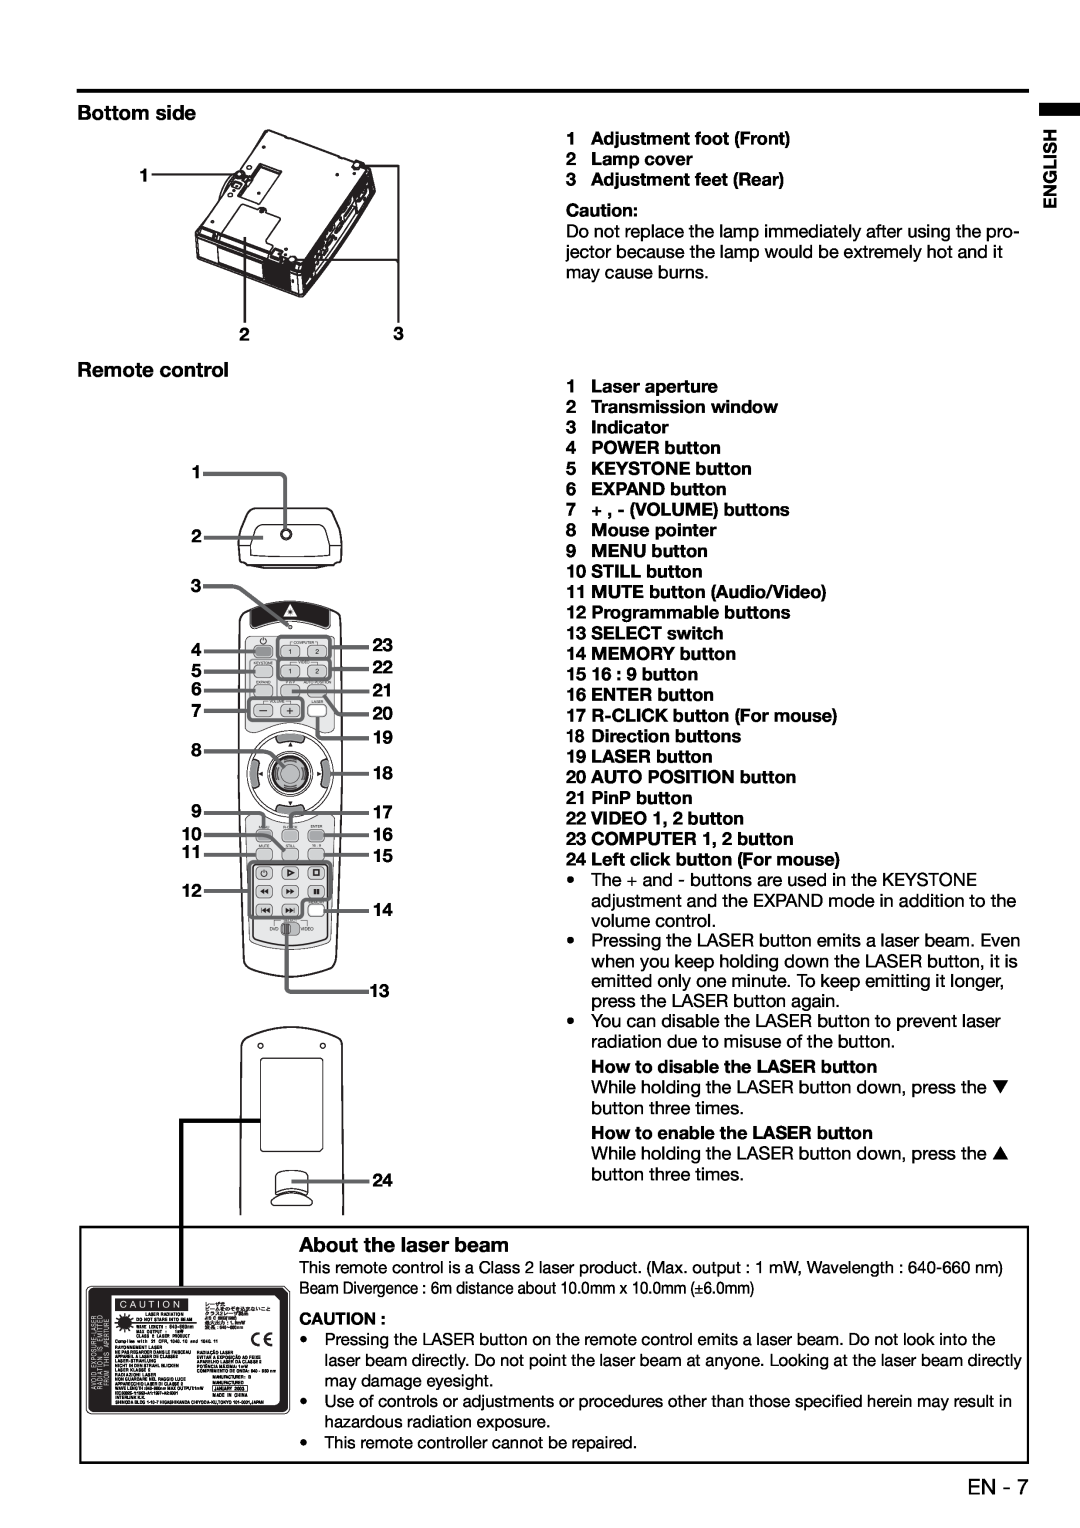 Mitsubishi Electronics XD480U user manual Bottom side, Remote control, About the laser beam 